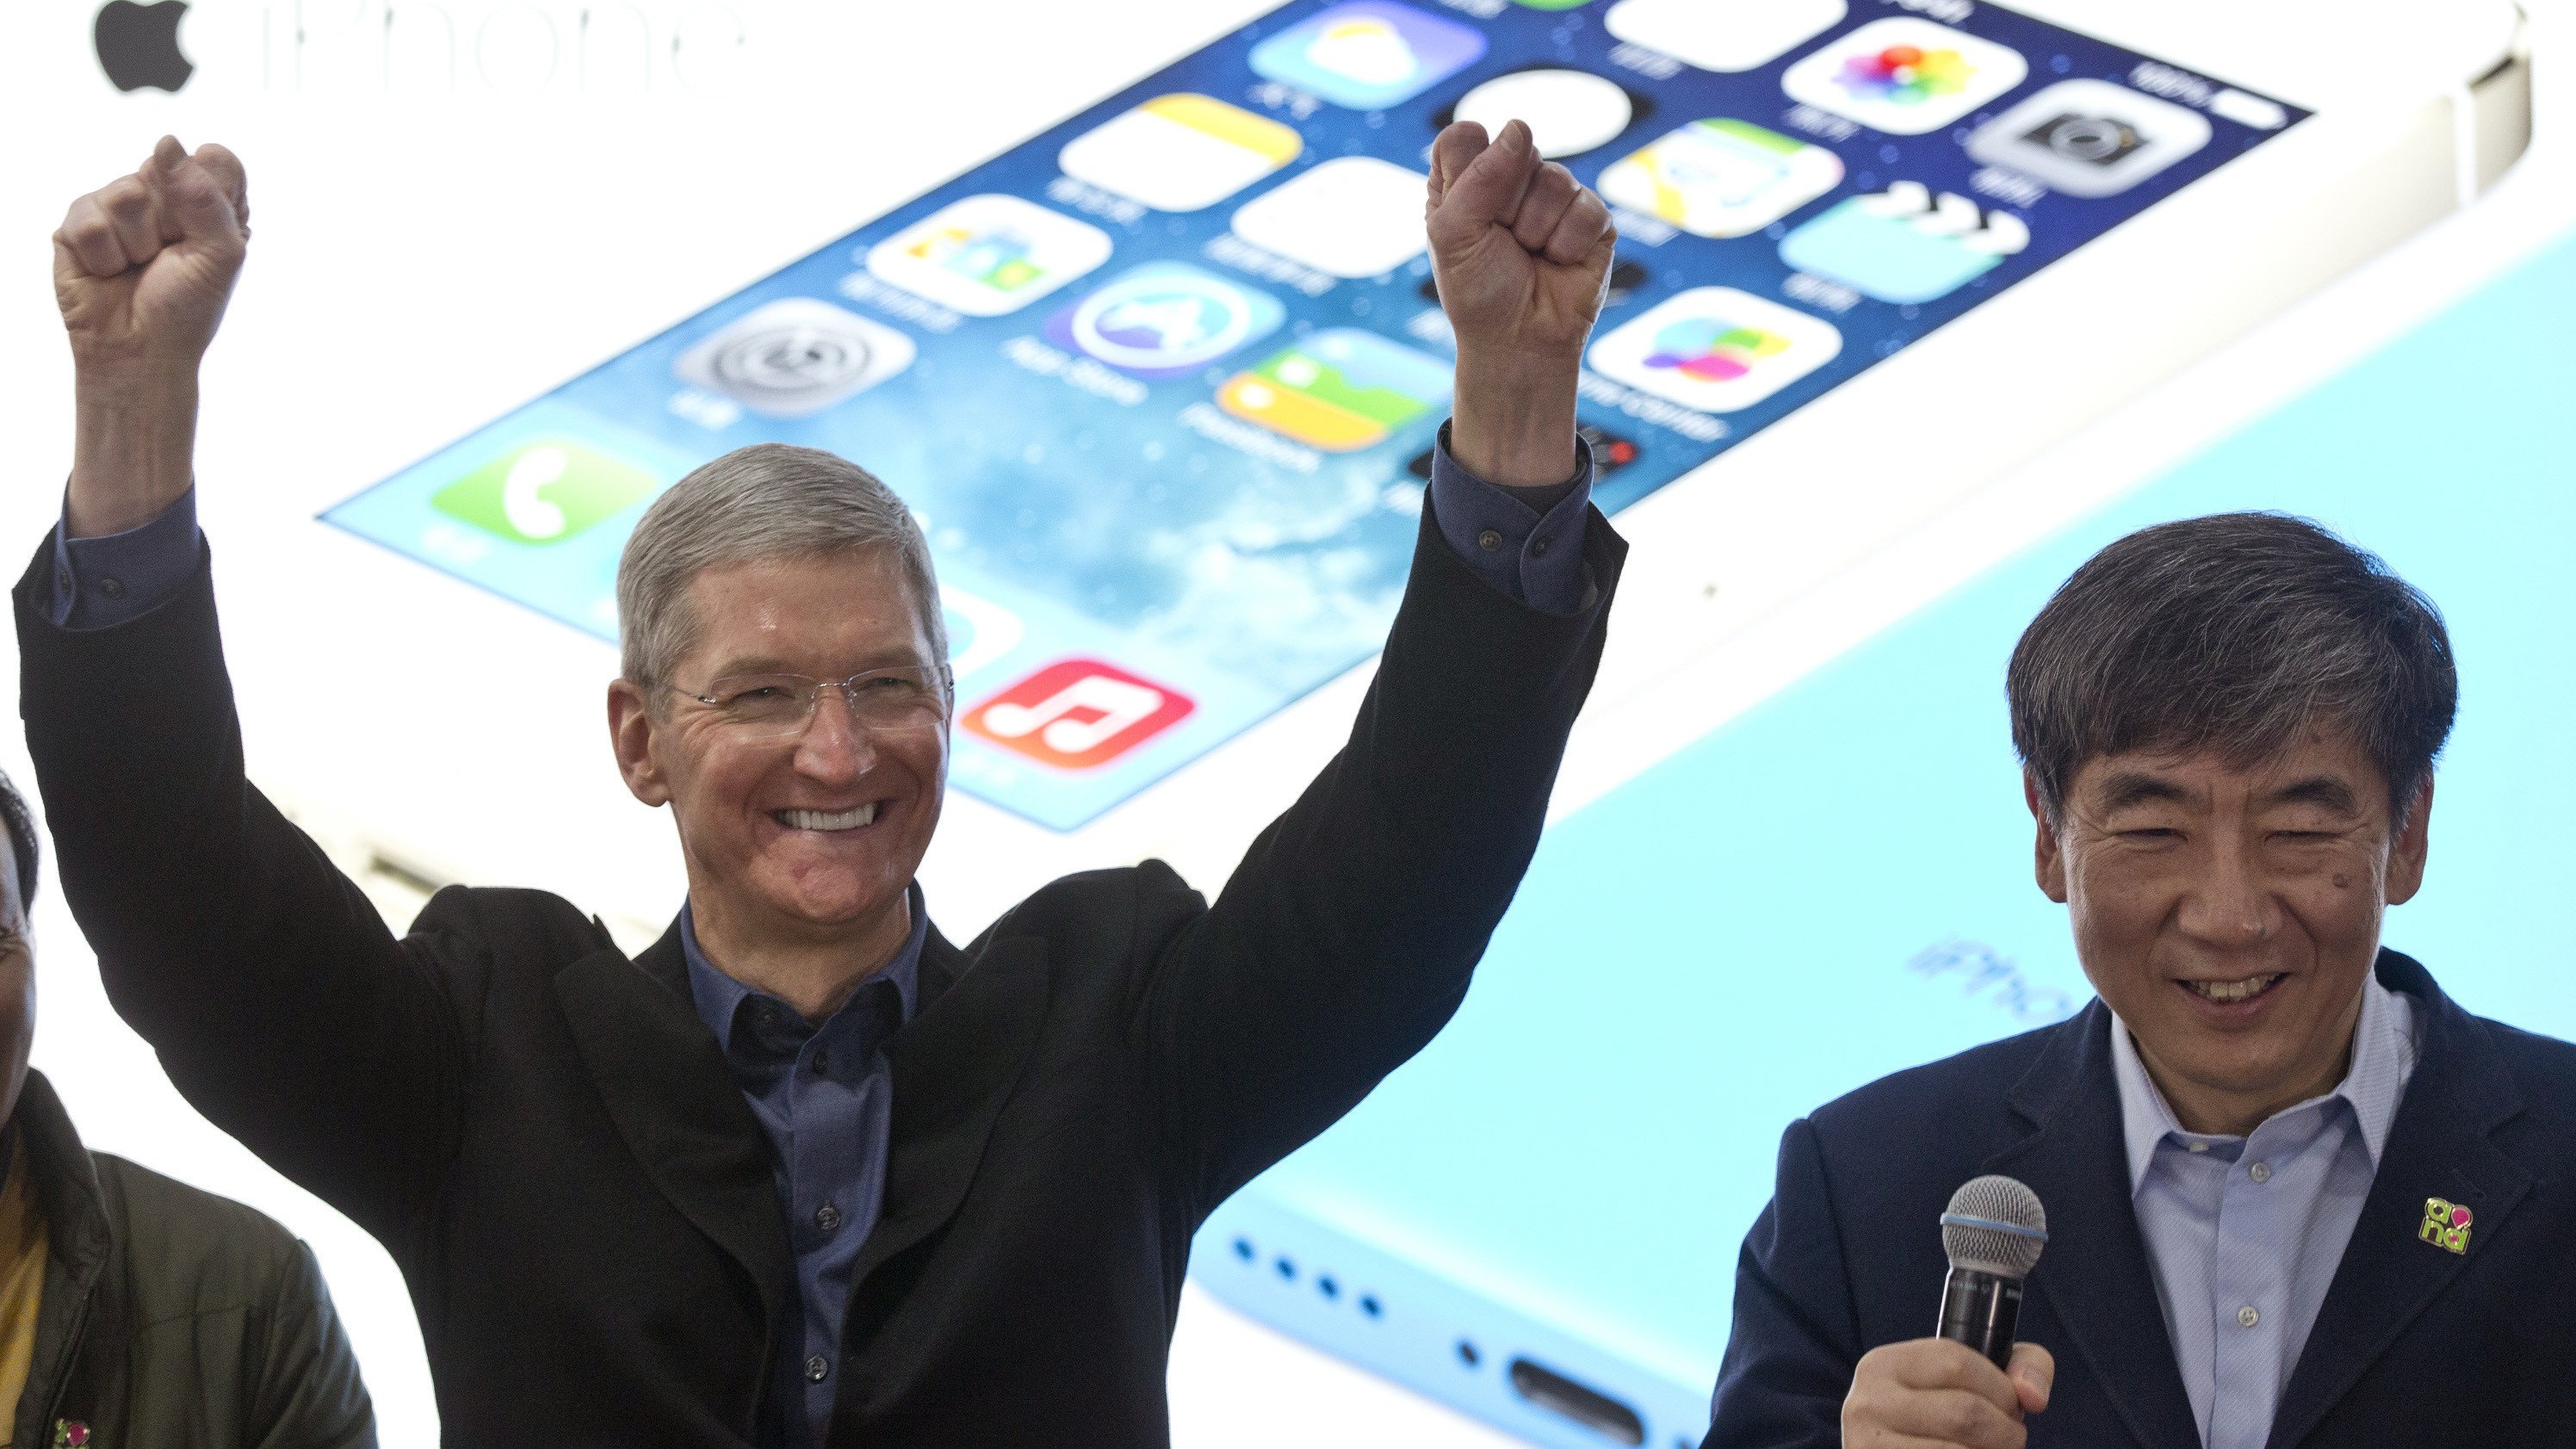 Tim Cook is the year of CEO 2014 in CNN 00